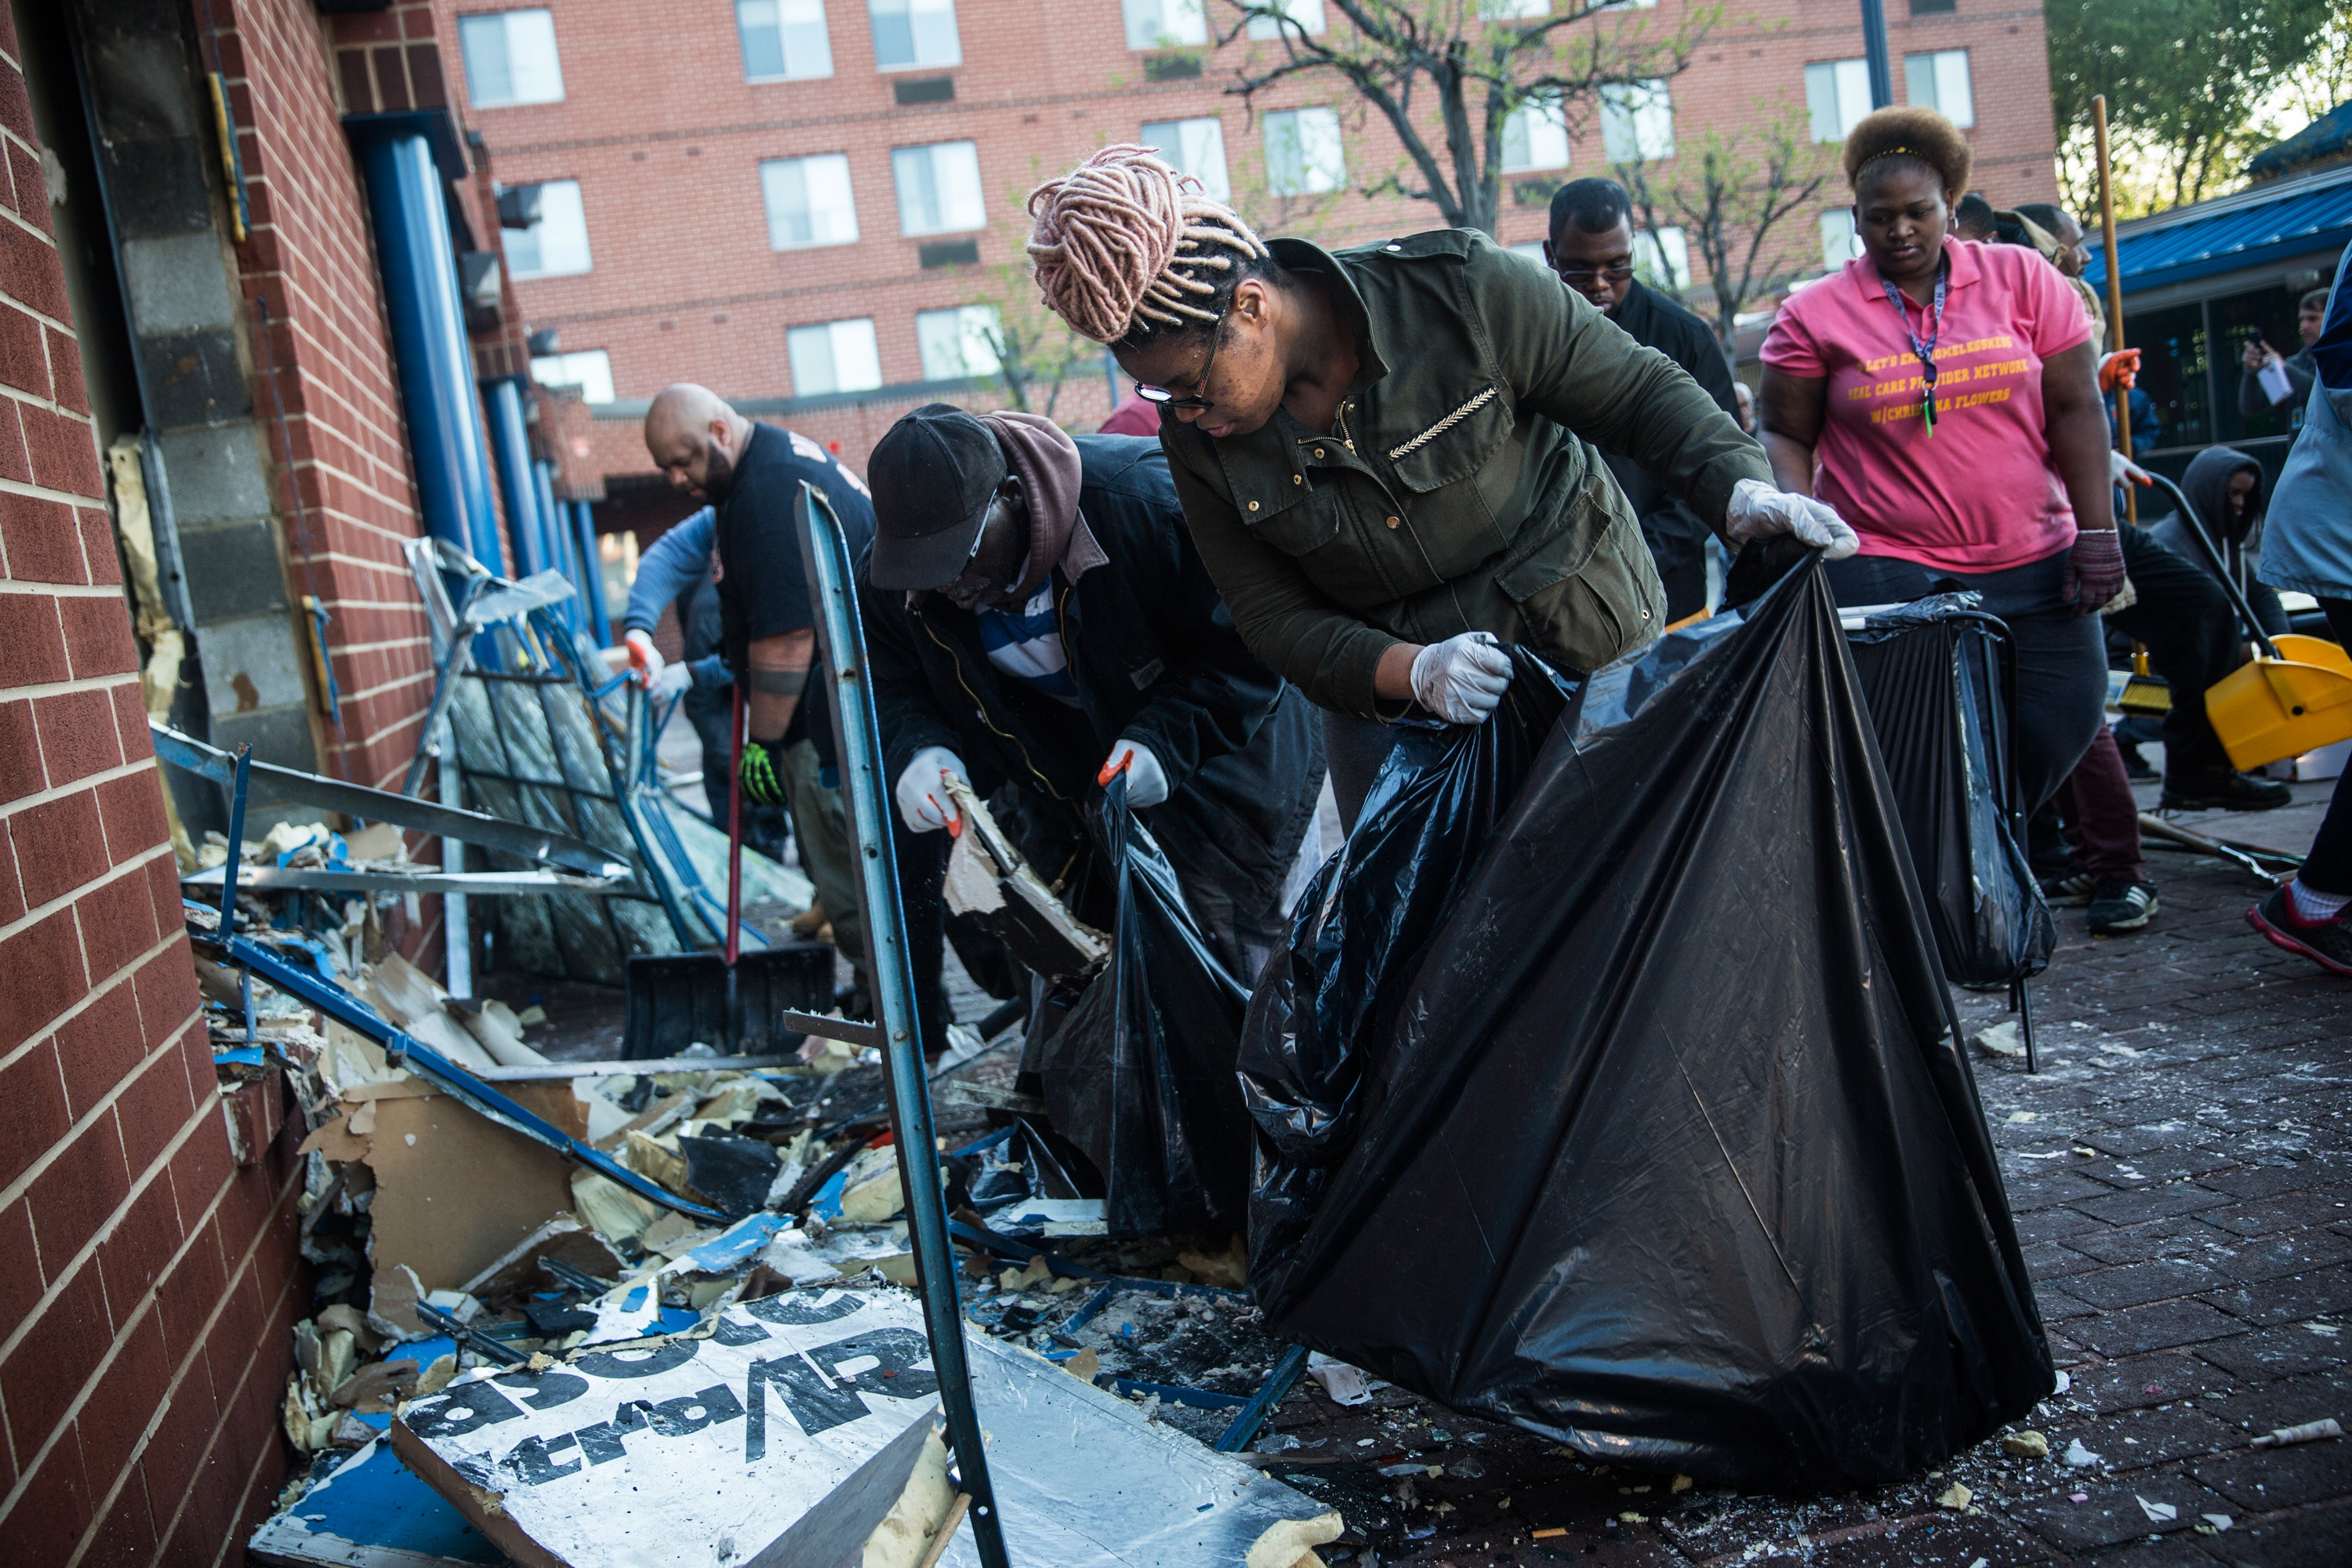 BALTIMORE, MD - APRIL 28:  Members of the community clean up debris from a CVS pharmacy that was set on fire yesterday during rioting after the funeral of Freddie Gray, on April 28, 2015 in Baltimore, Maryland. Gray, 25, was arrested for possessing a switch blade knife April 12 outside the Gilmor Houses housing project on Baltimore's west side. According to his attorney, Gray died a week later in the hospital from a severe spinal cord injury he received while in police custody.  (Photo by Andrew Burton/Getty Images)